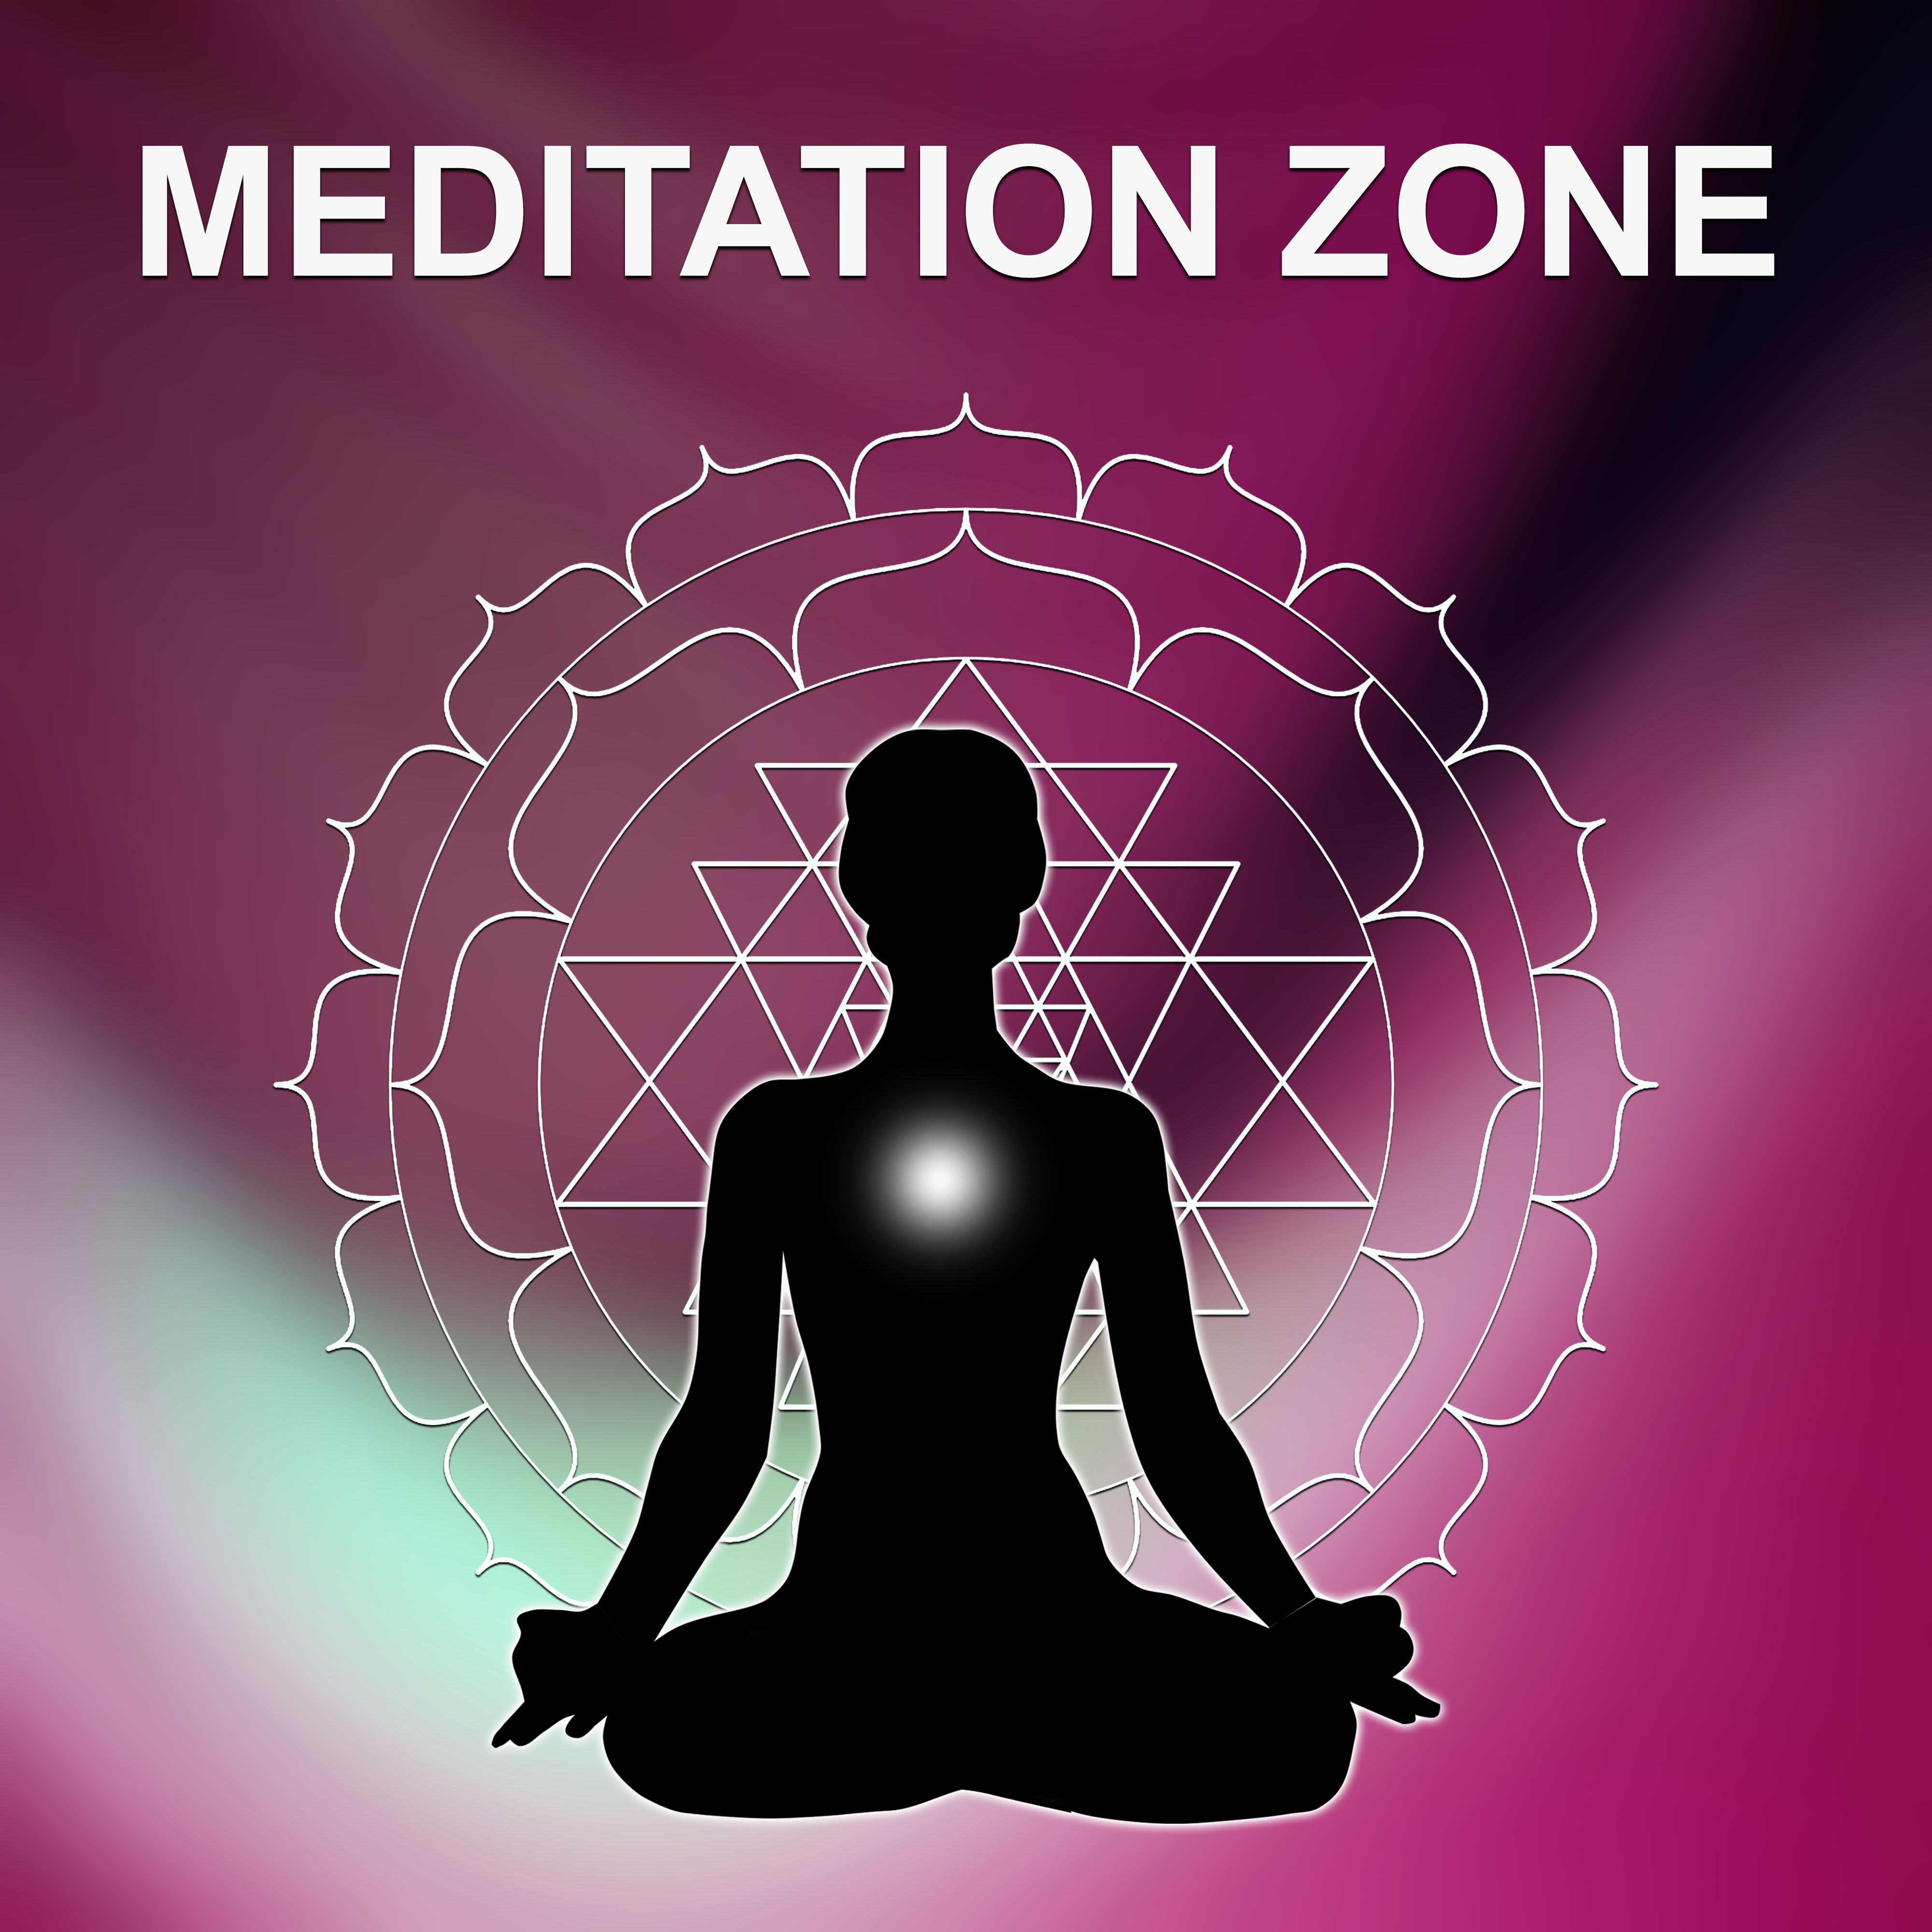 Meditation Zone  Nature Sounds, Ambient Music, Concentration, Learn to Meditate, Zen, Tranquility